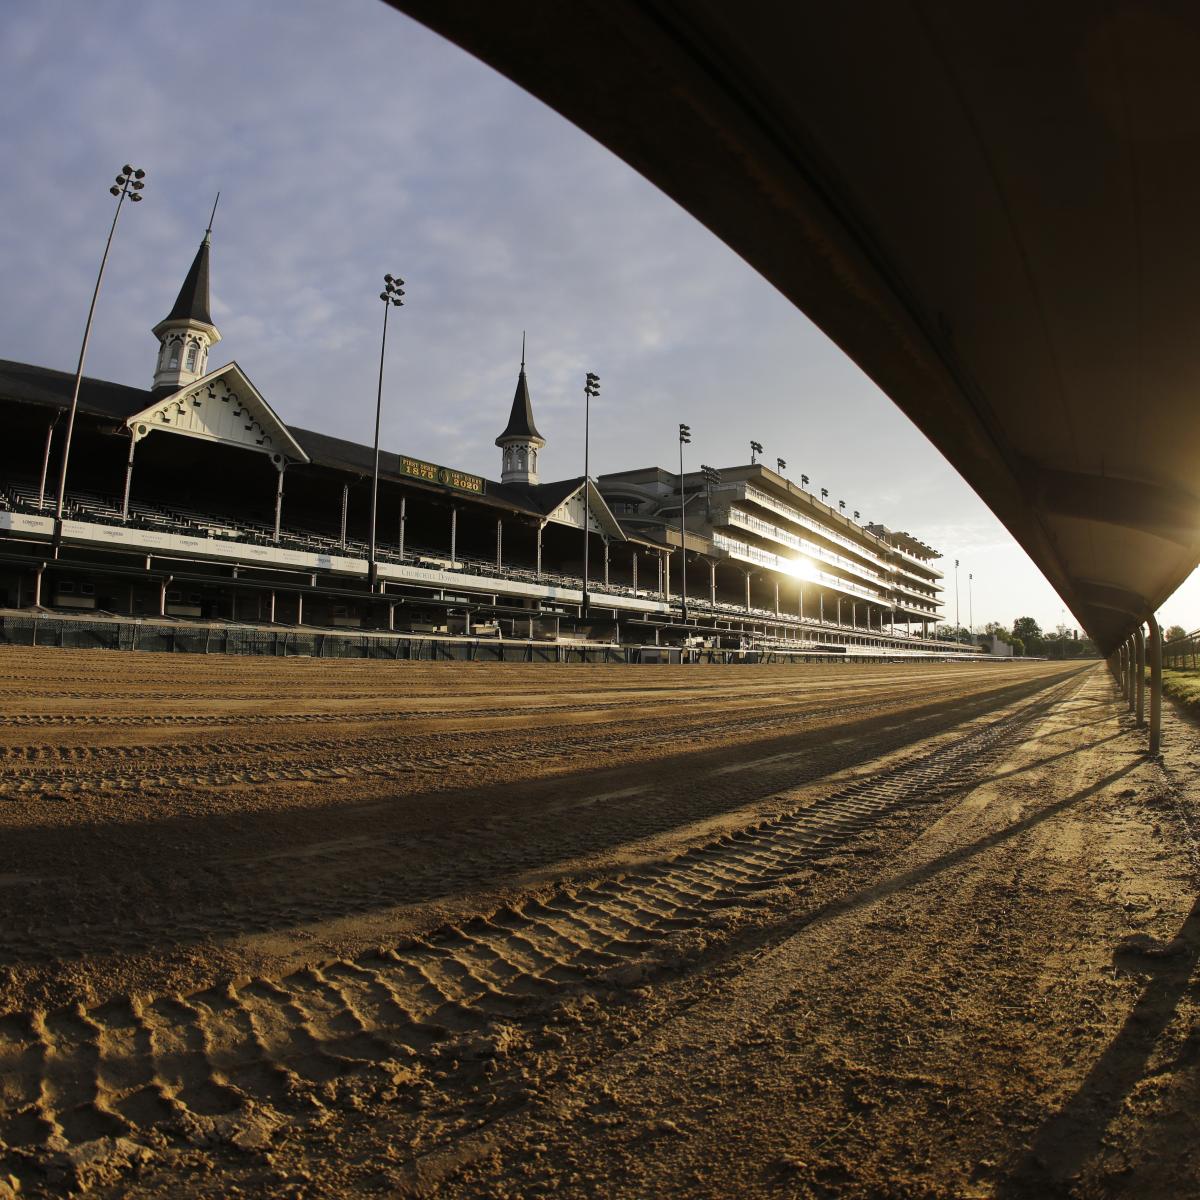 Kentucky Derby 2020 Post Time Start Time, Schedule and More for 146th